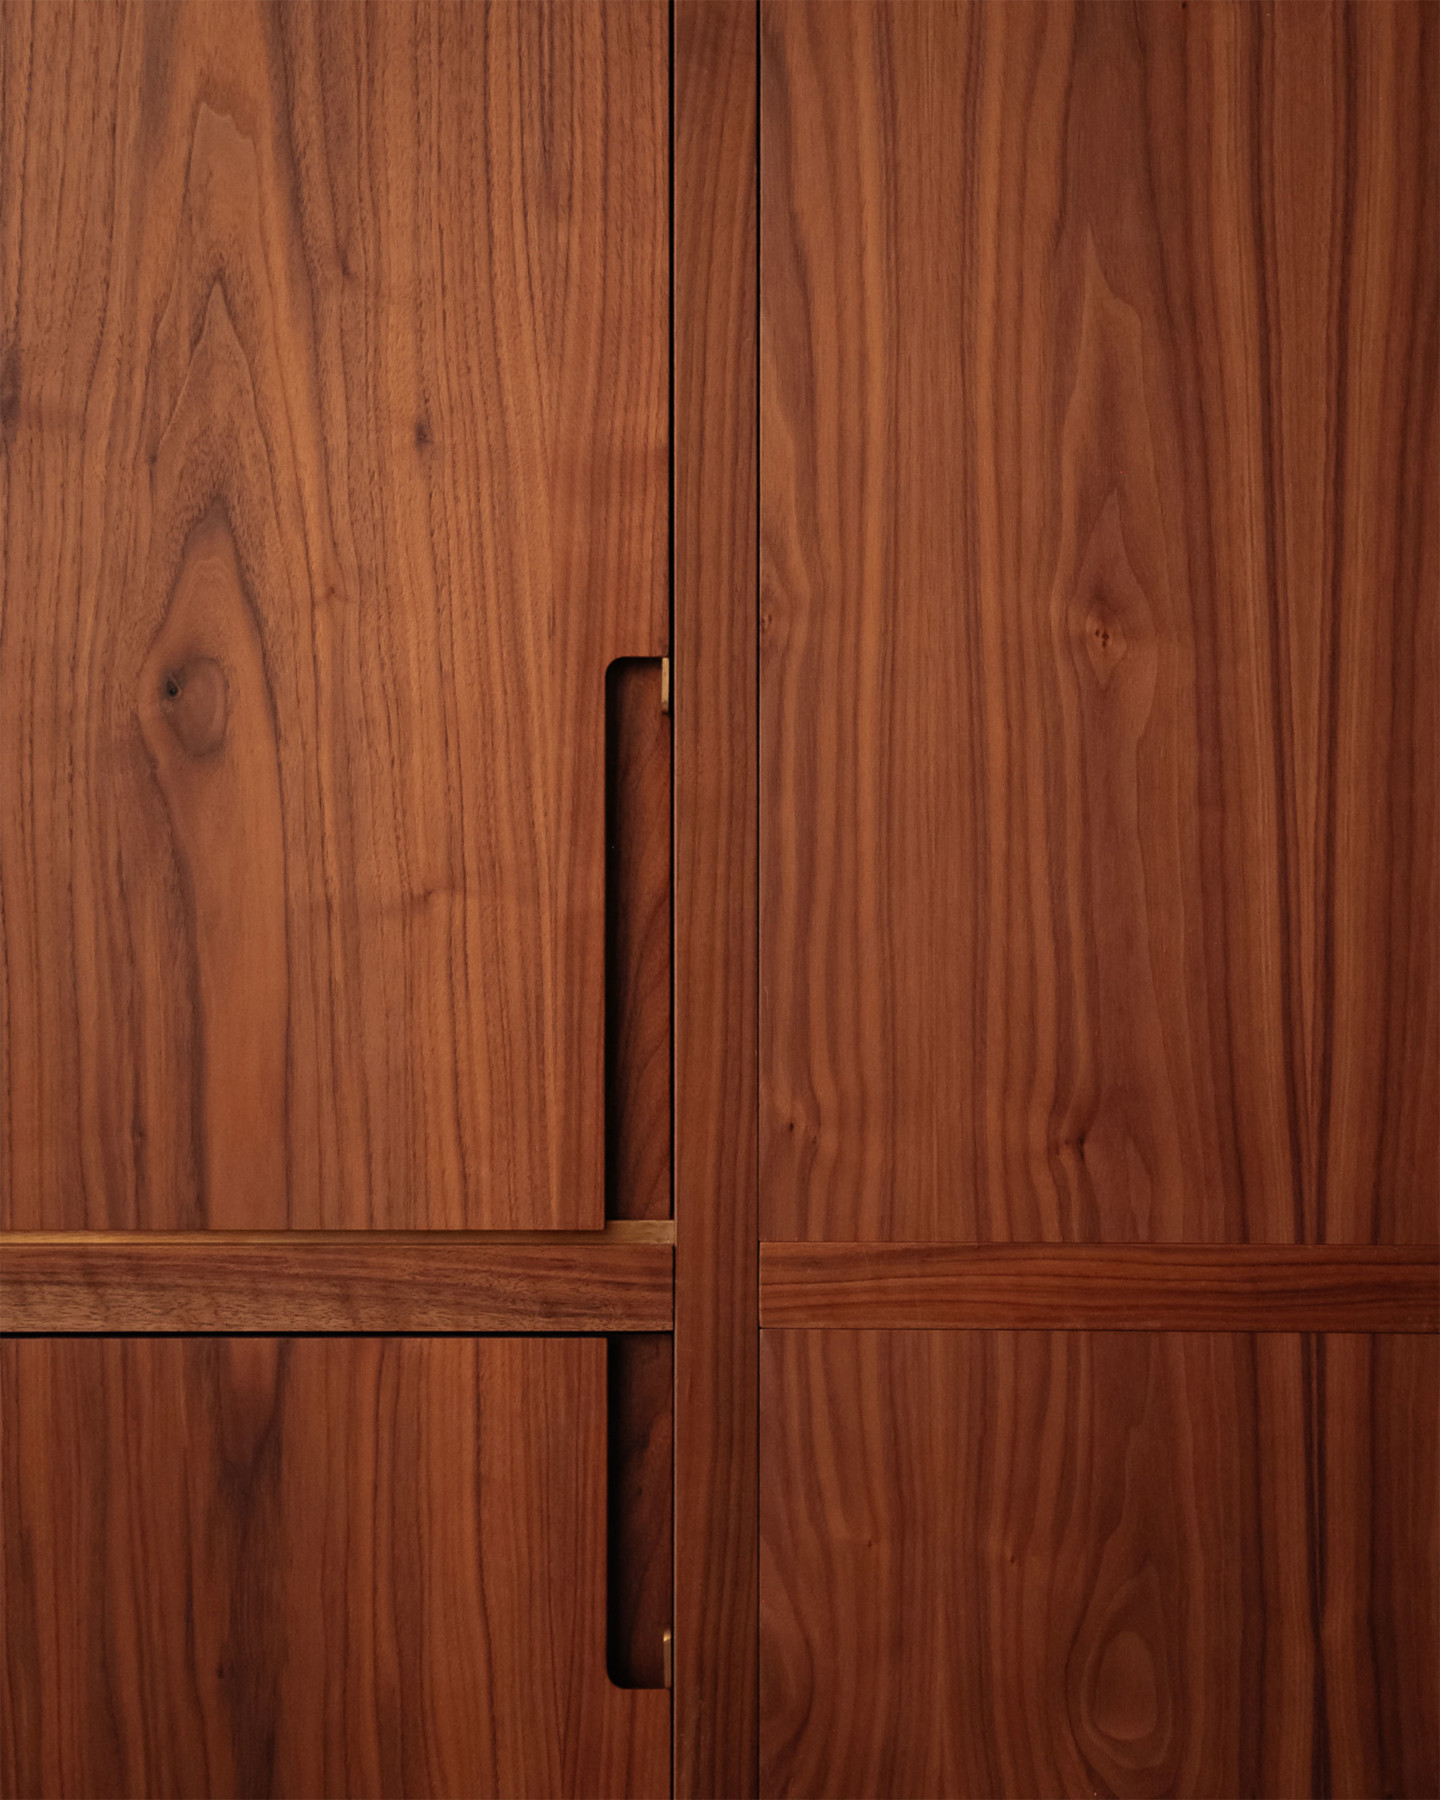 Jamie-fobert-architects-house-in-primrose-hill-interior-detail-joinery-wood-handle.jpg